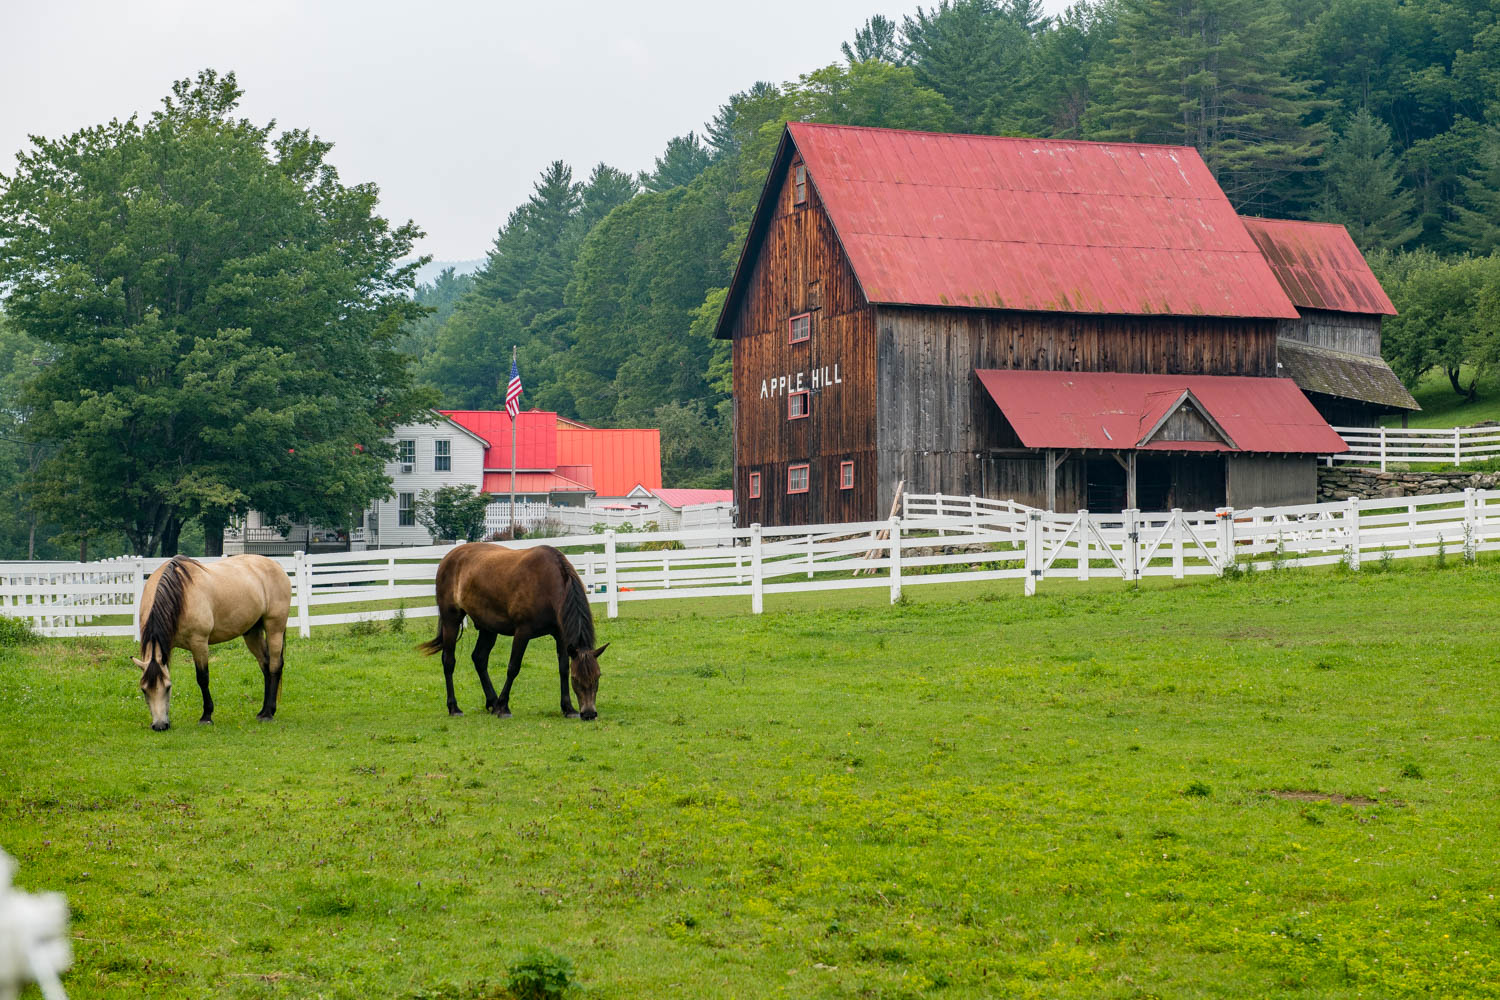 Horses at Apple Hill Farm in Rochester, VT taken by Accidentally Wes Anderson